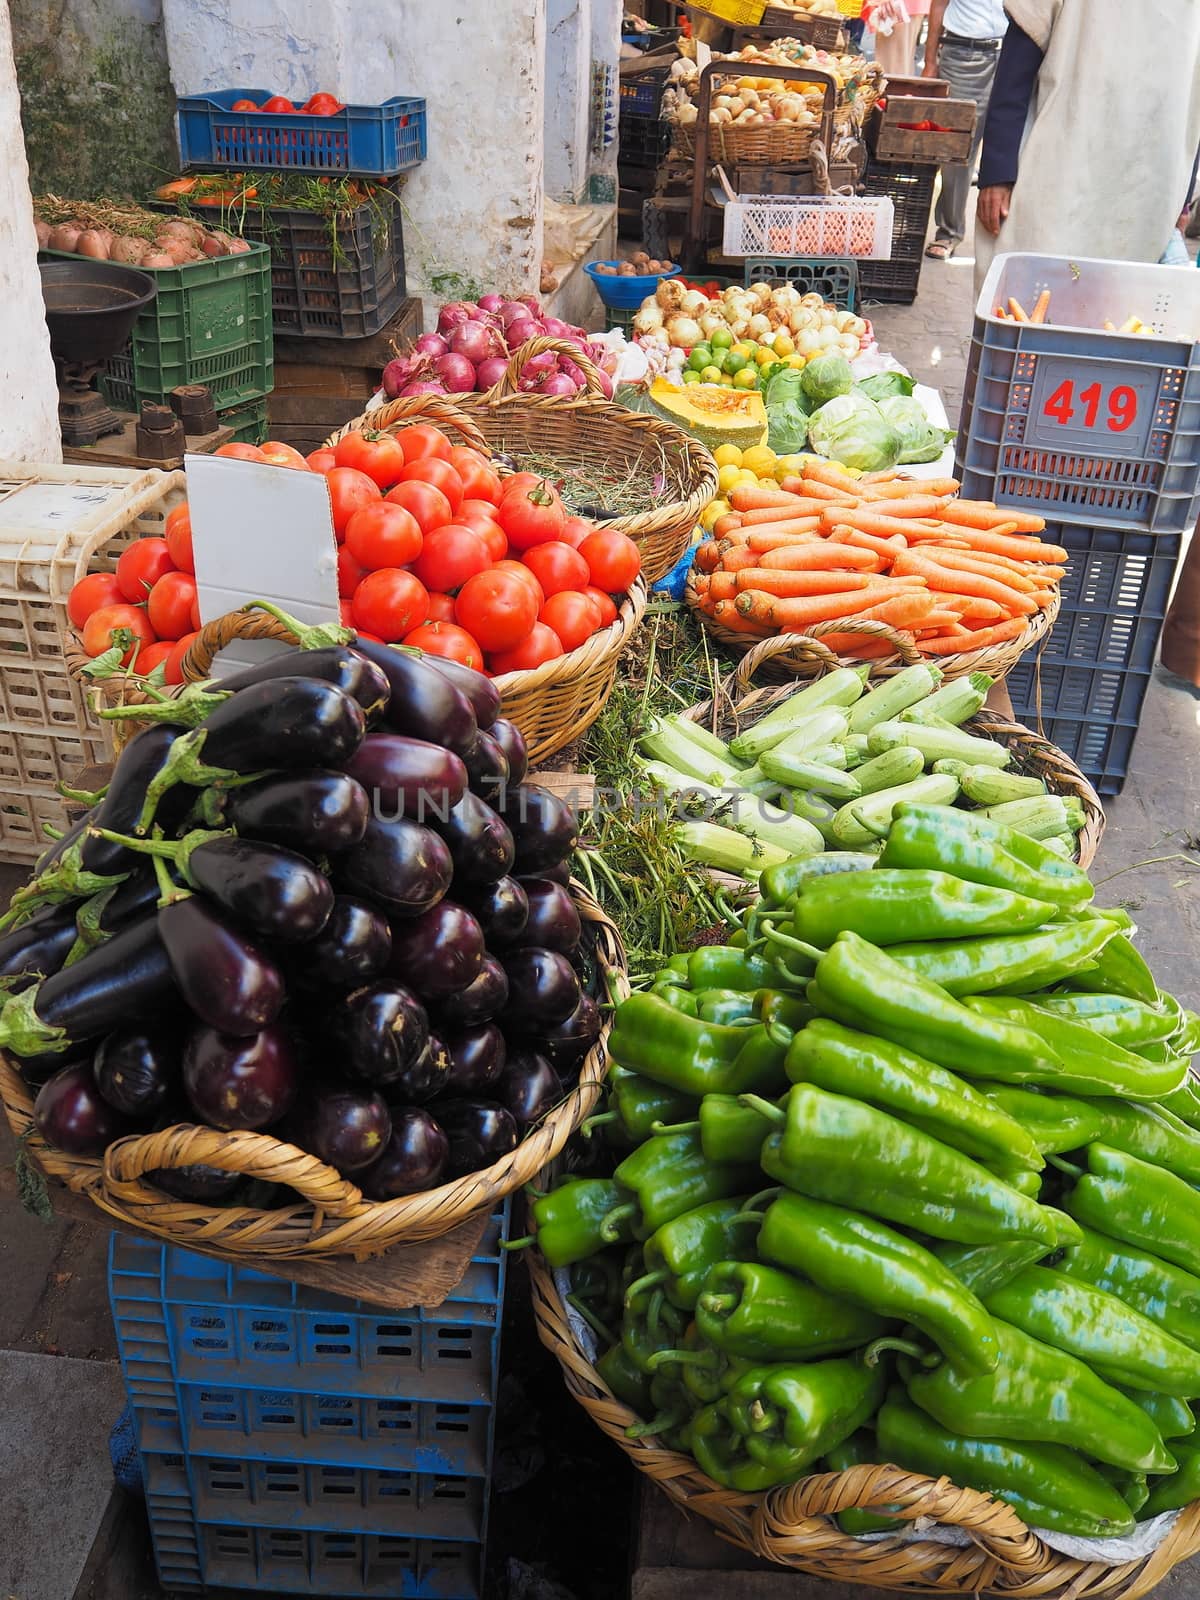 Colorful market stall of vegetables and produce by PhilHarland